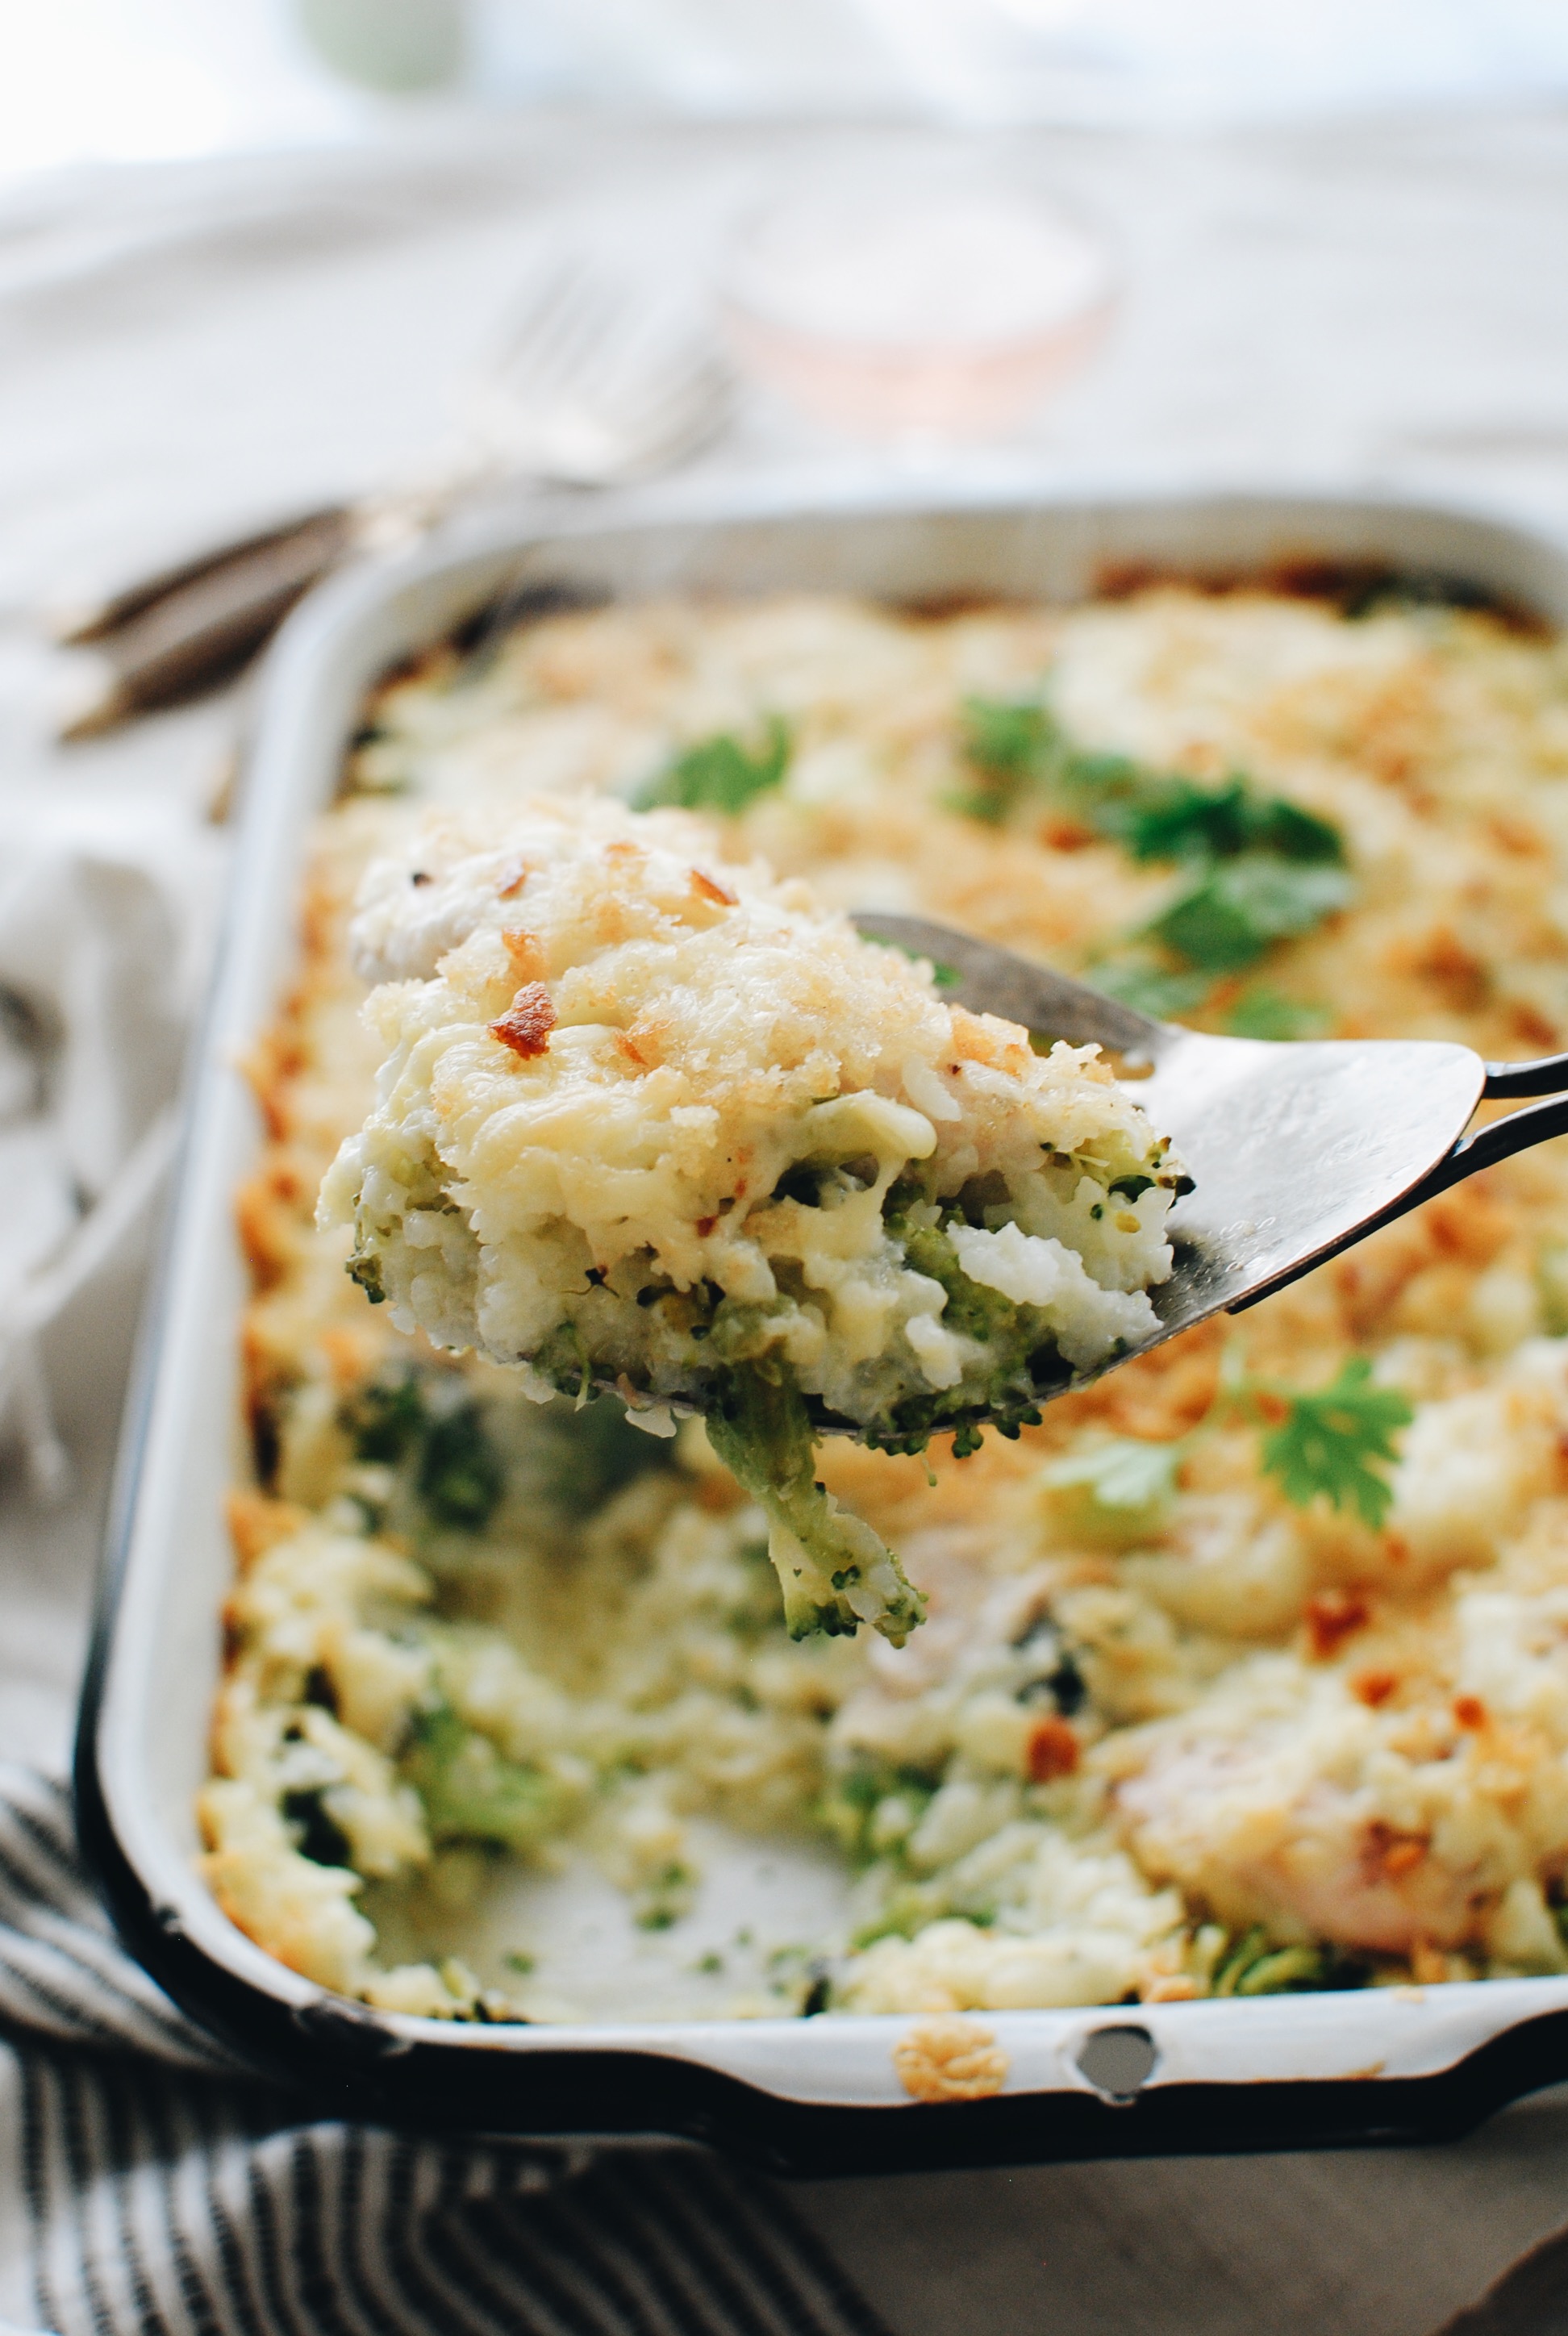 Broccoli, Cheese and Rice Casserole / Bev Cooks